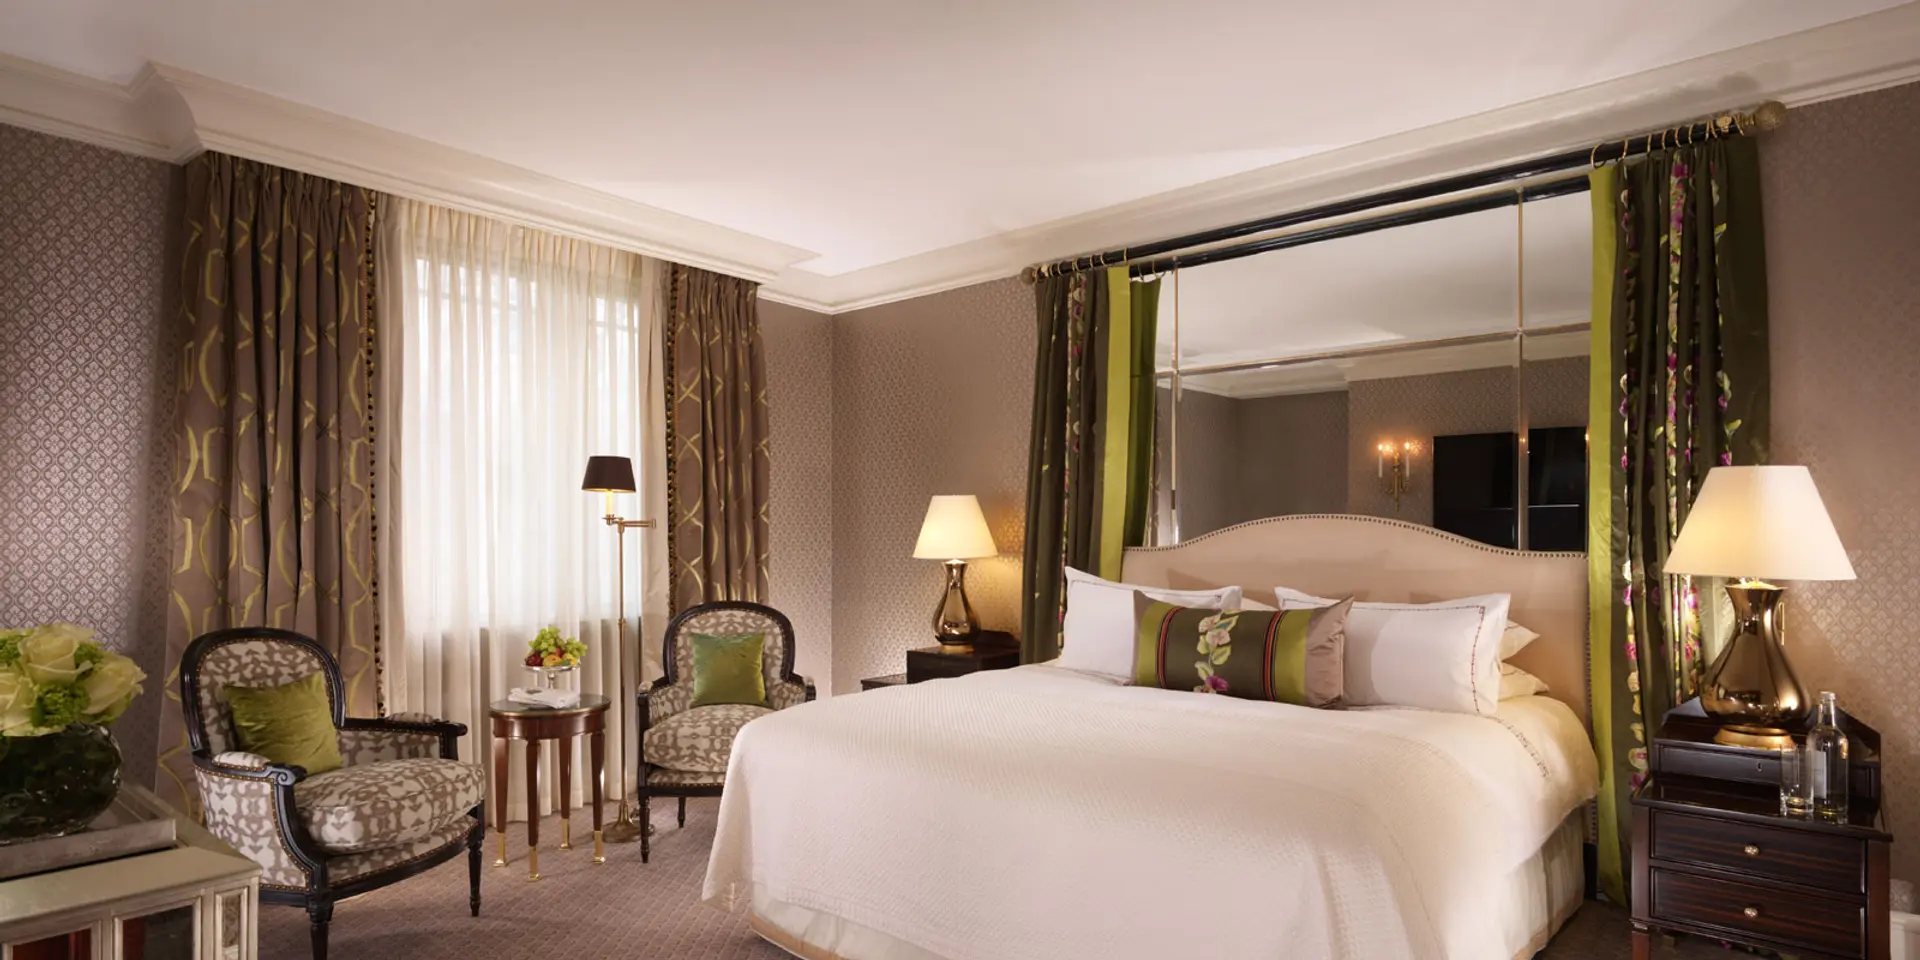 Hotel review Accommodation' - The Dorchester - Dorchester Collection - 4